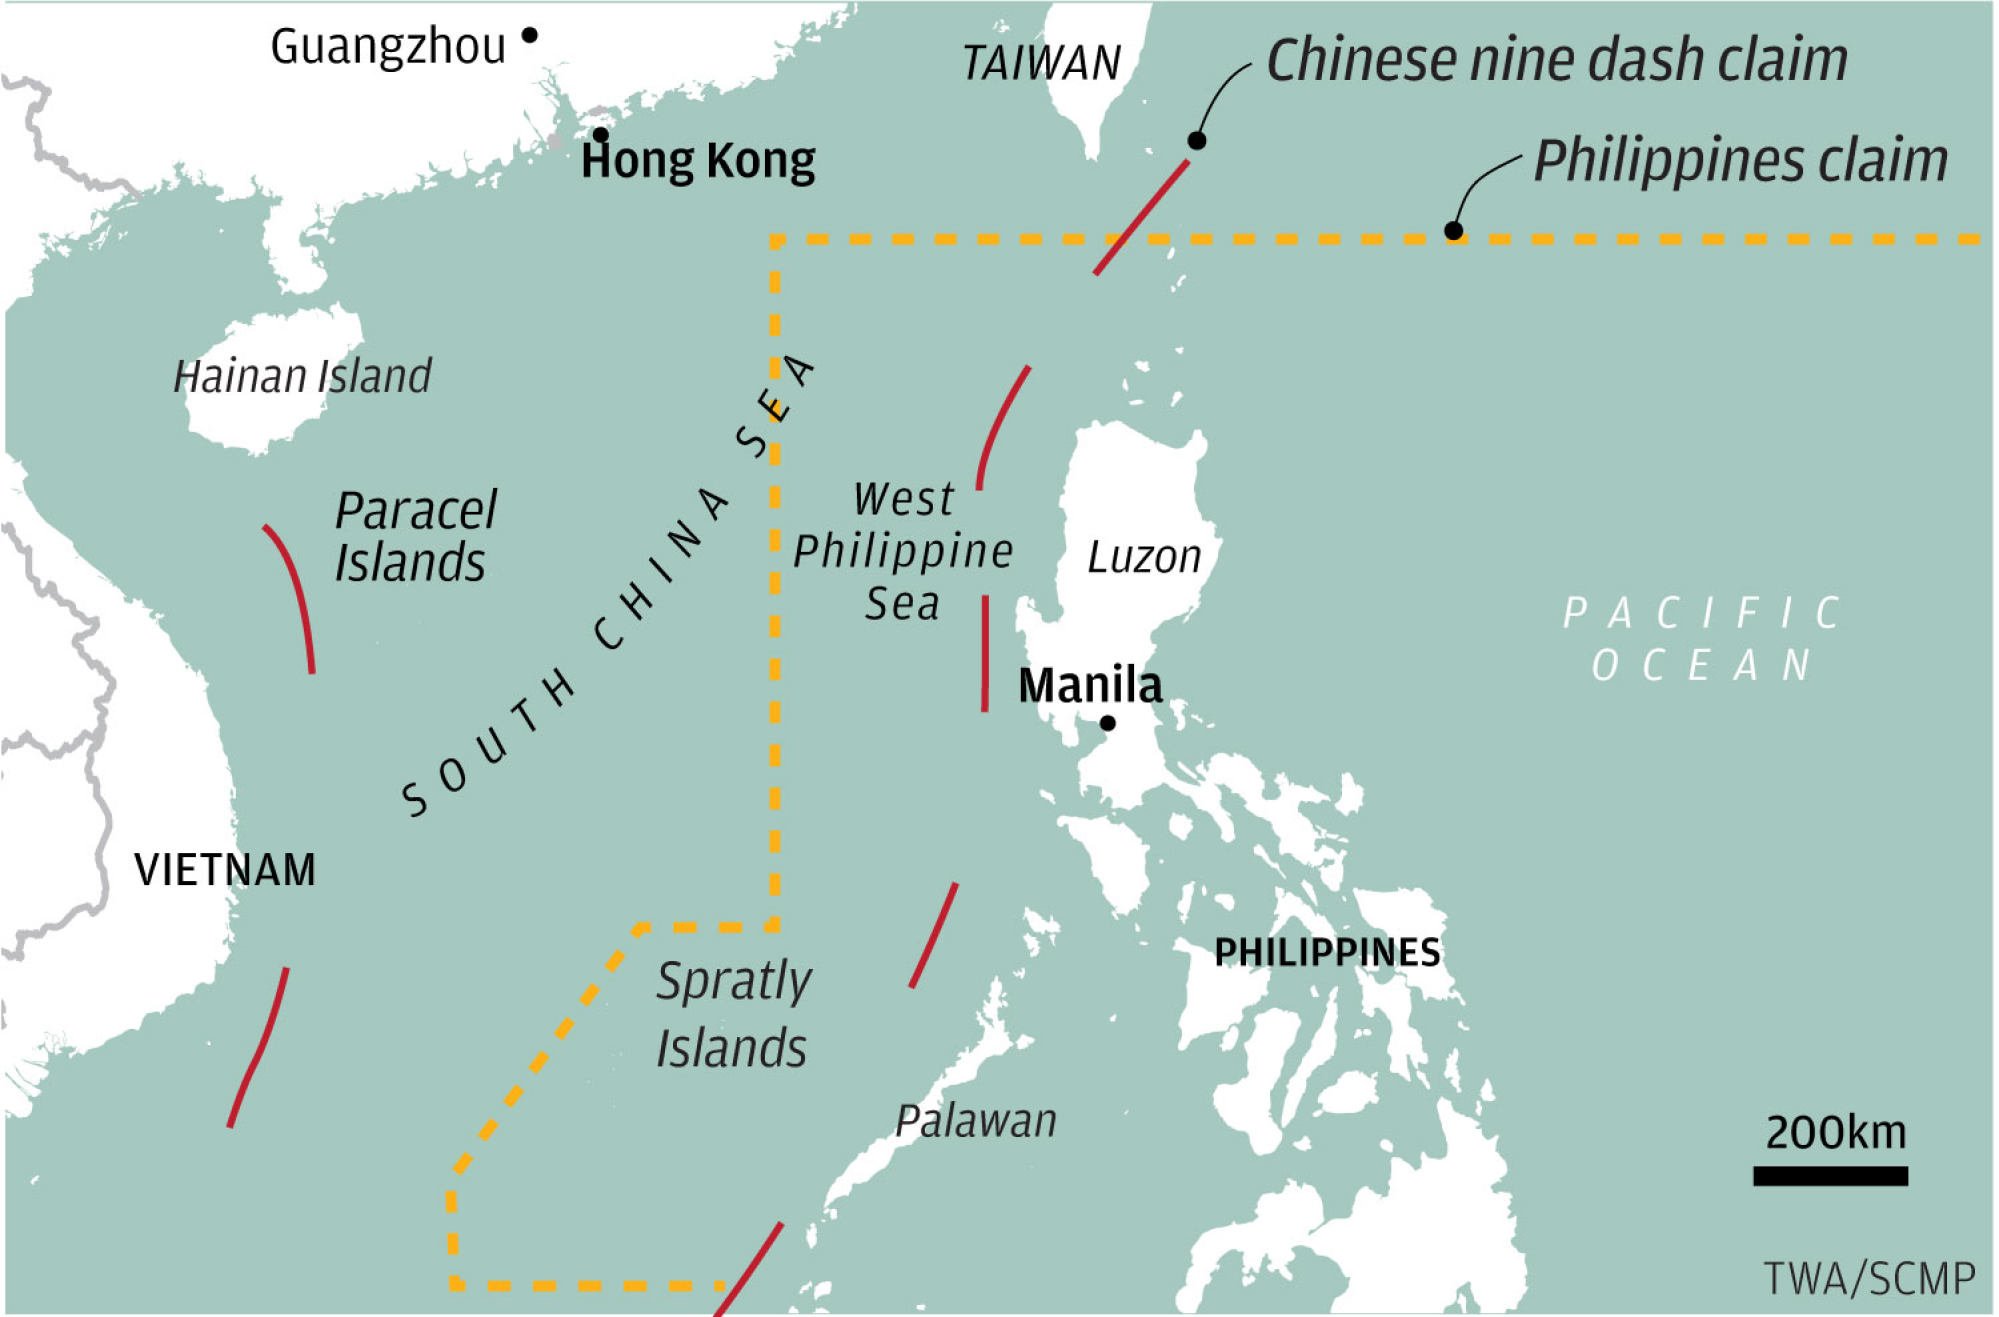 China and the Philippines have overlapping claims in the South China Sea. Map: TWA/SCMP